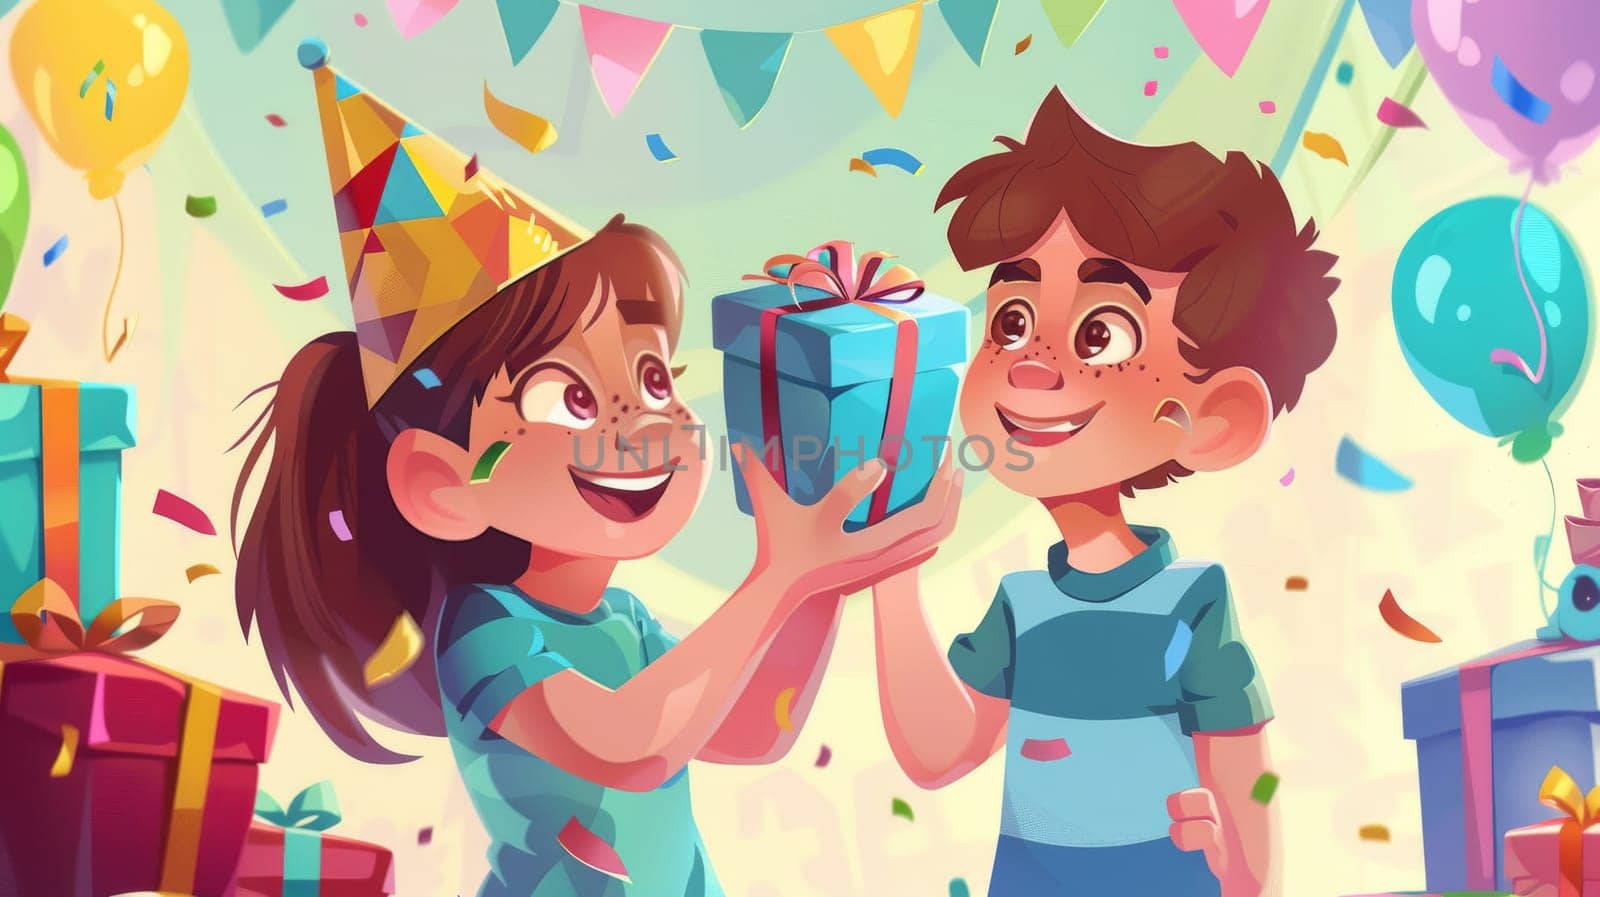 Invitation banners for kids' birthday parties. Girl receives gift from boy. Child in festive hat holds present with confetti around. Children's event celebration flyer, Cartoon modern poster.